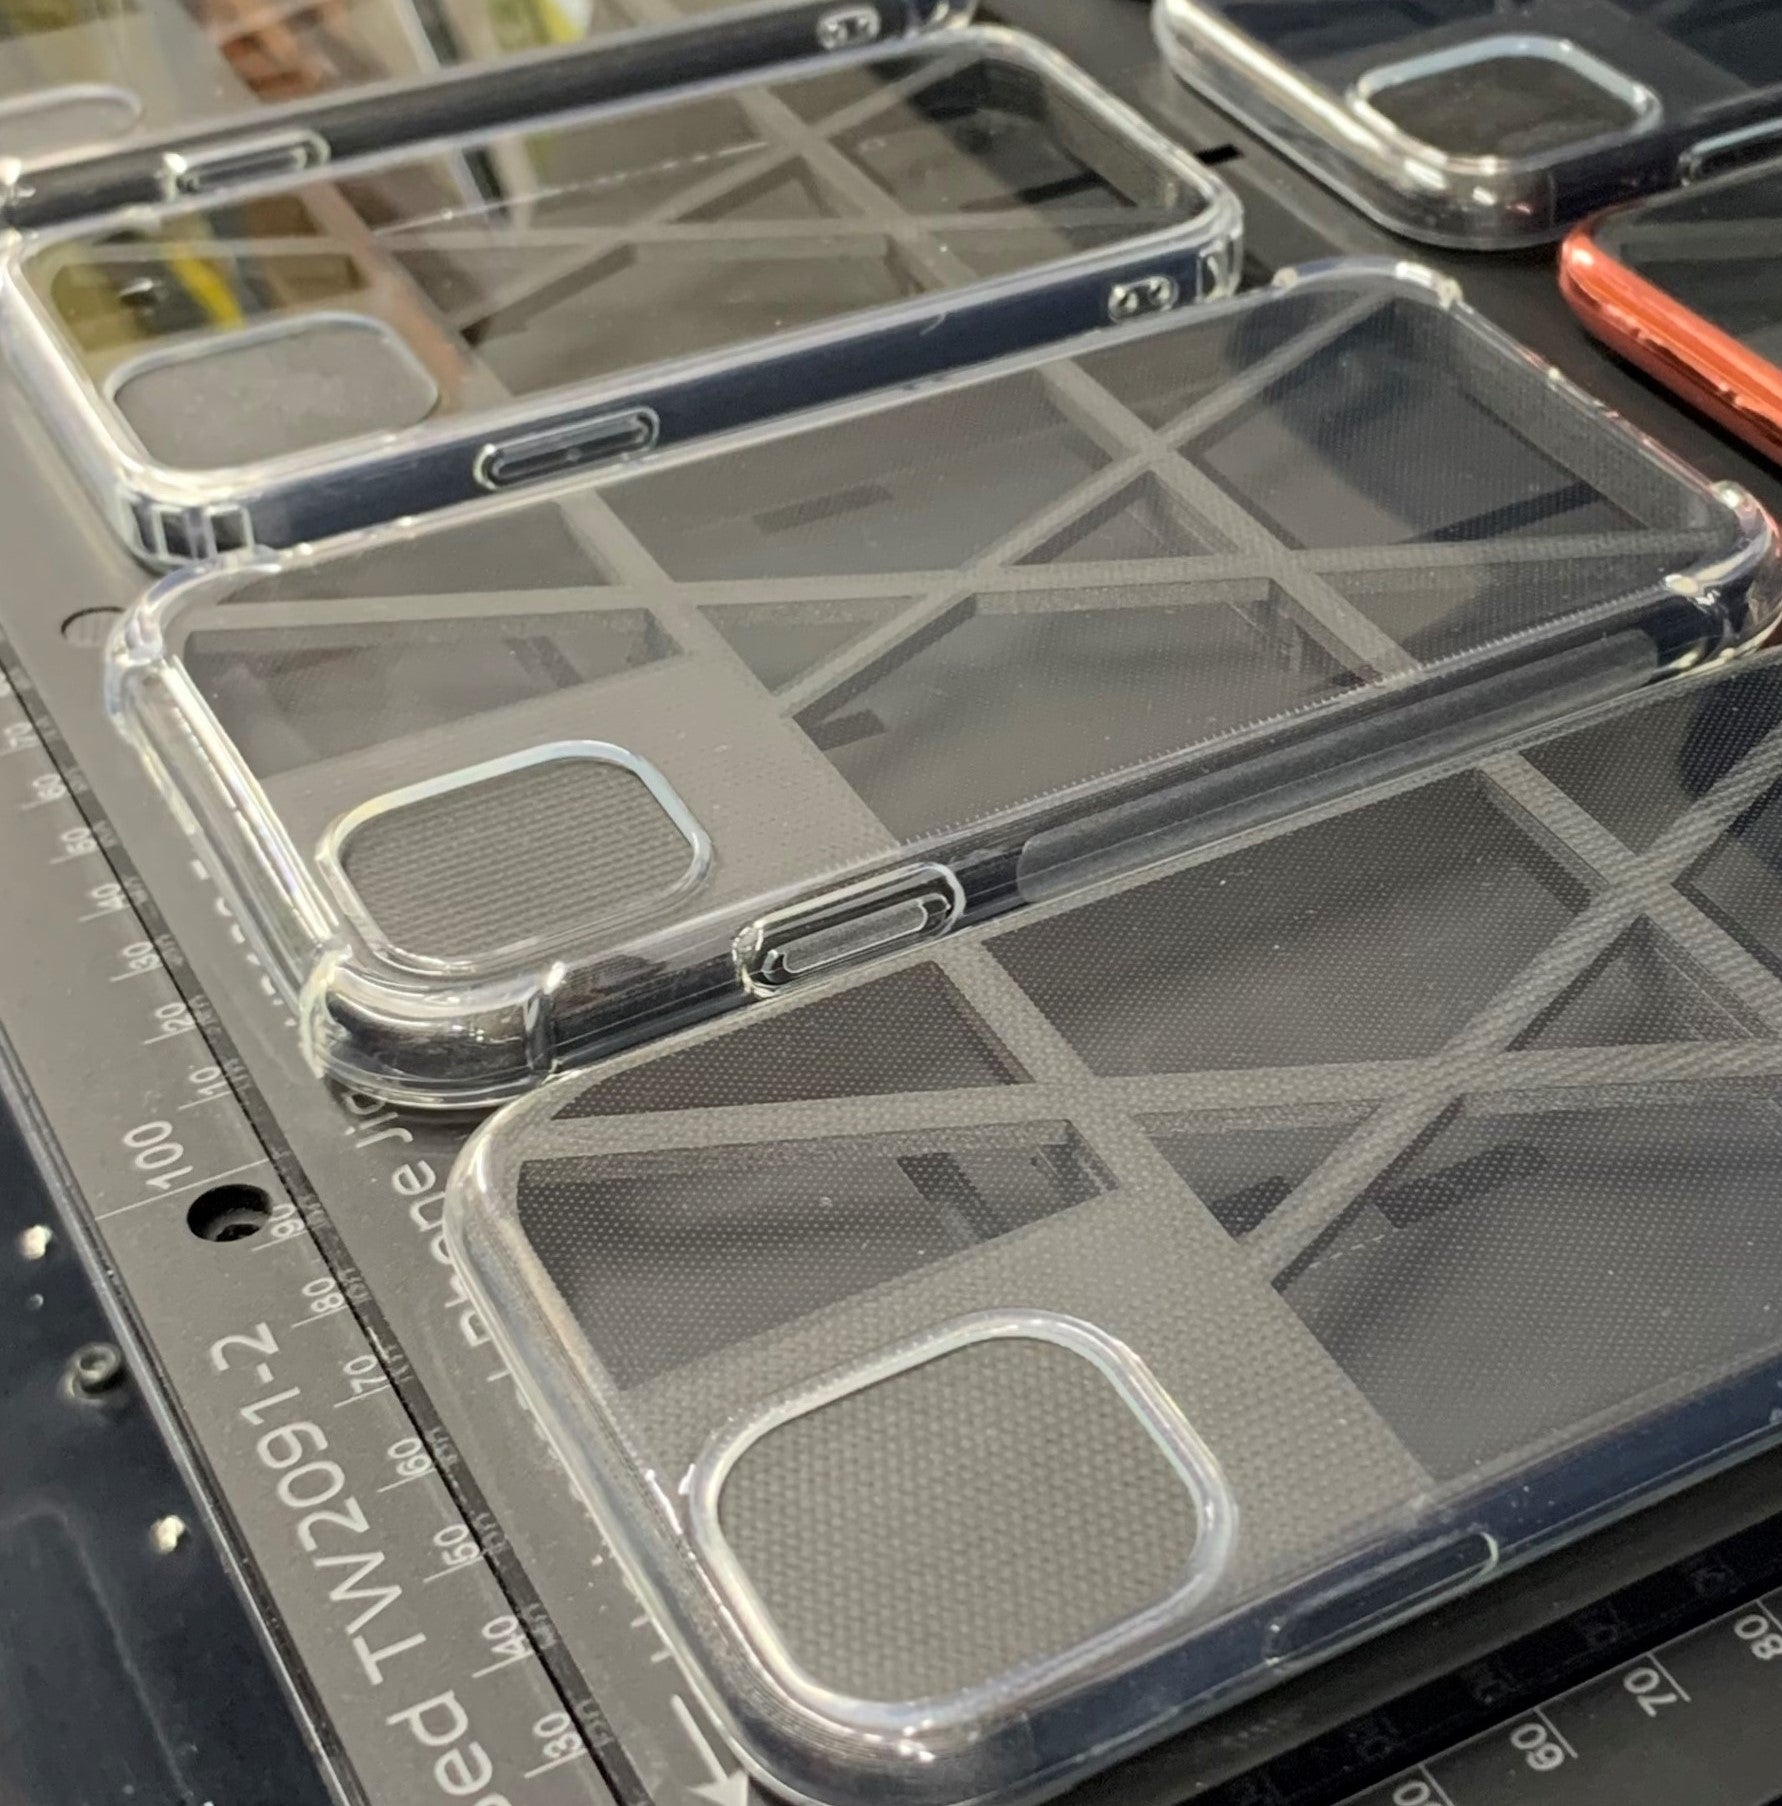 Phone Case Printing Jig Base Plate for A4 Flatbed Printers